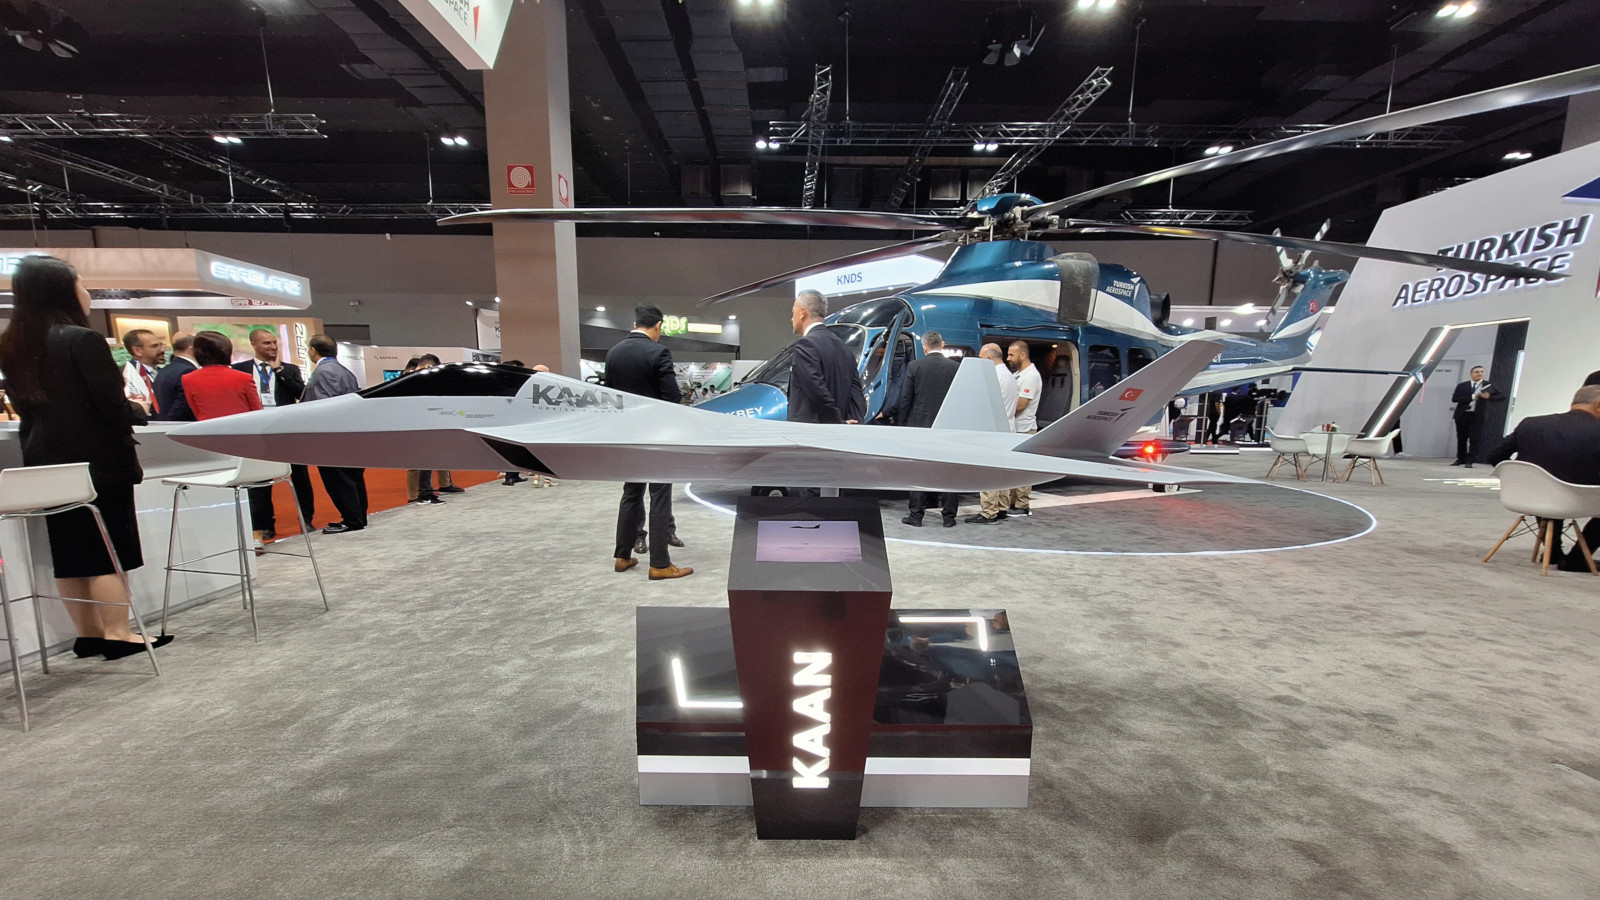 TAI Highlights KAAN, T625 Gokbey Helicopter, Other Products